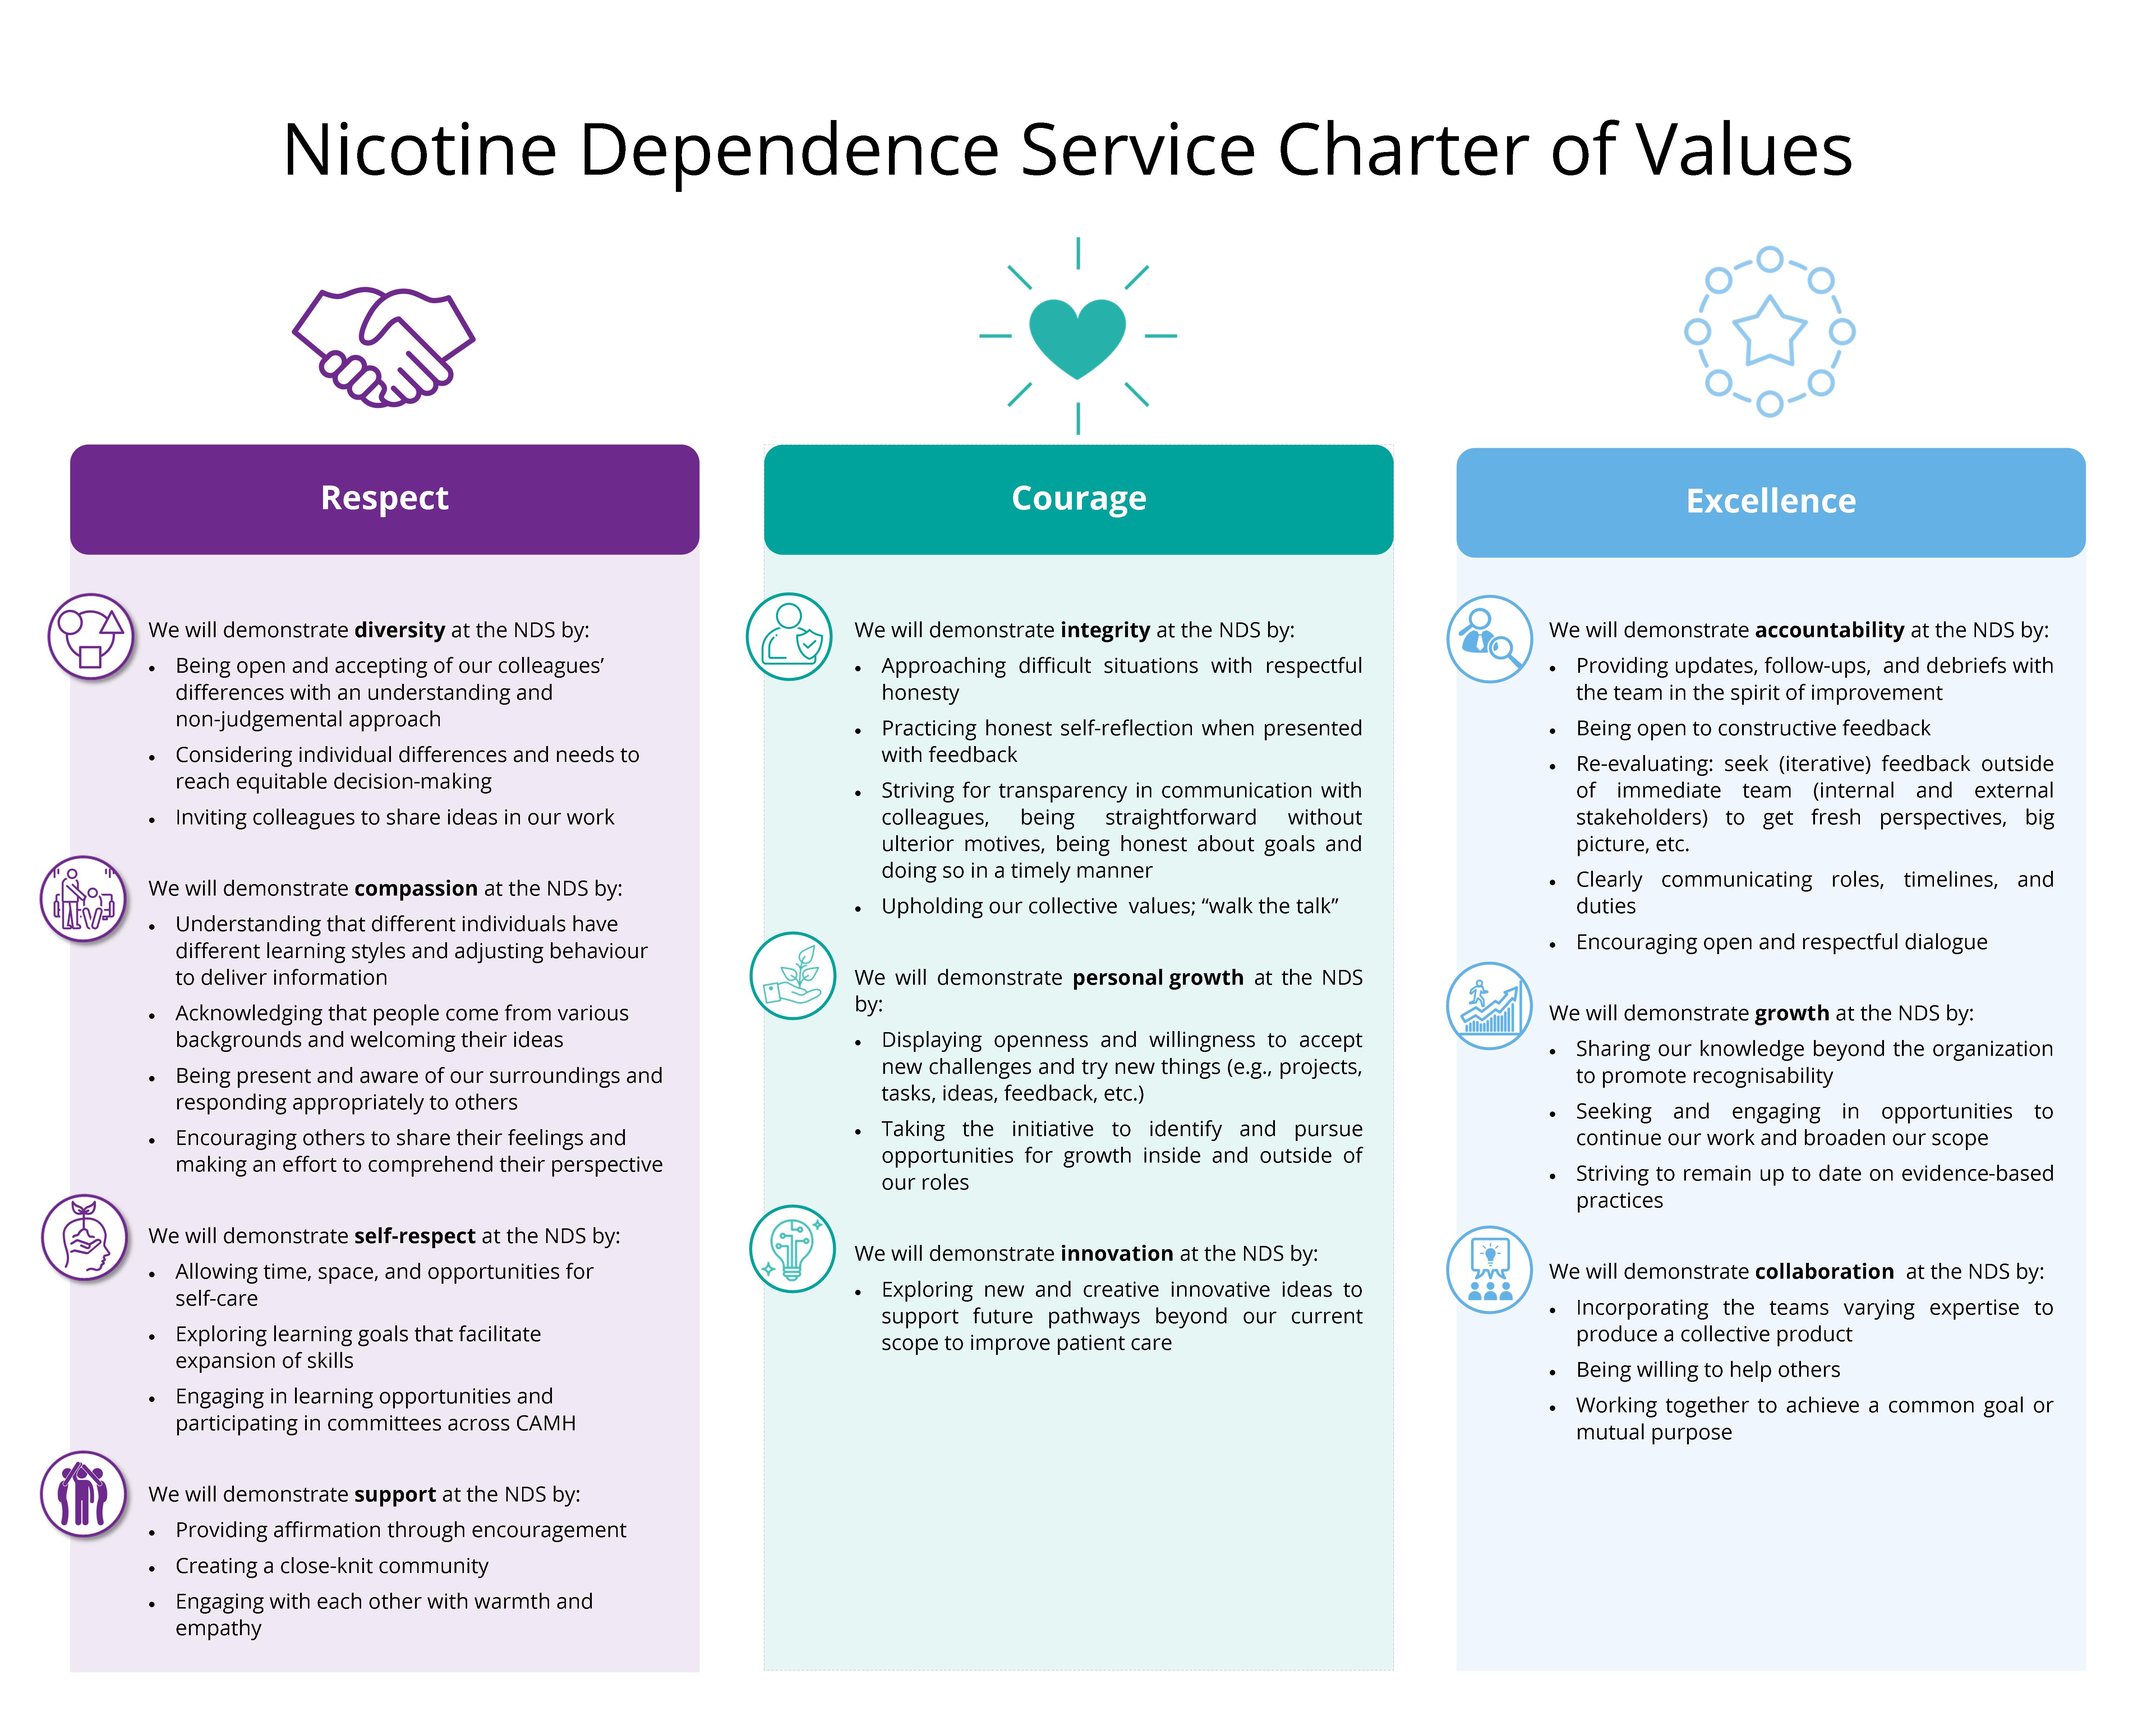 NDS Charter of Values_visual.jpg